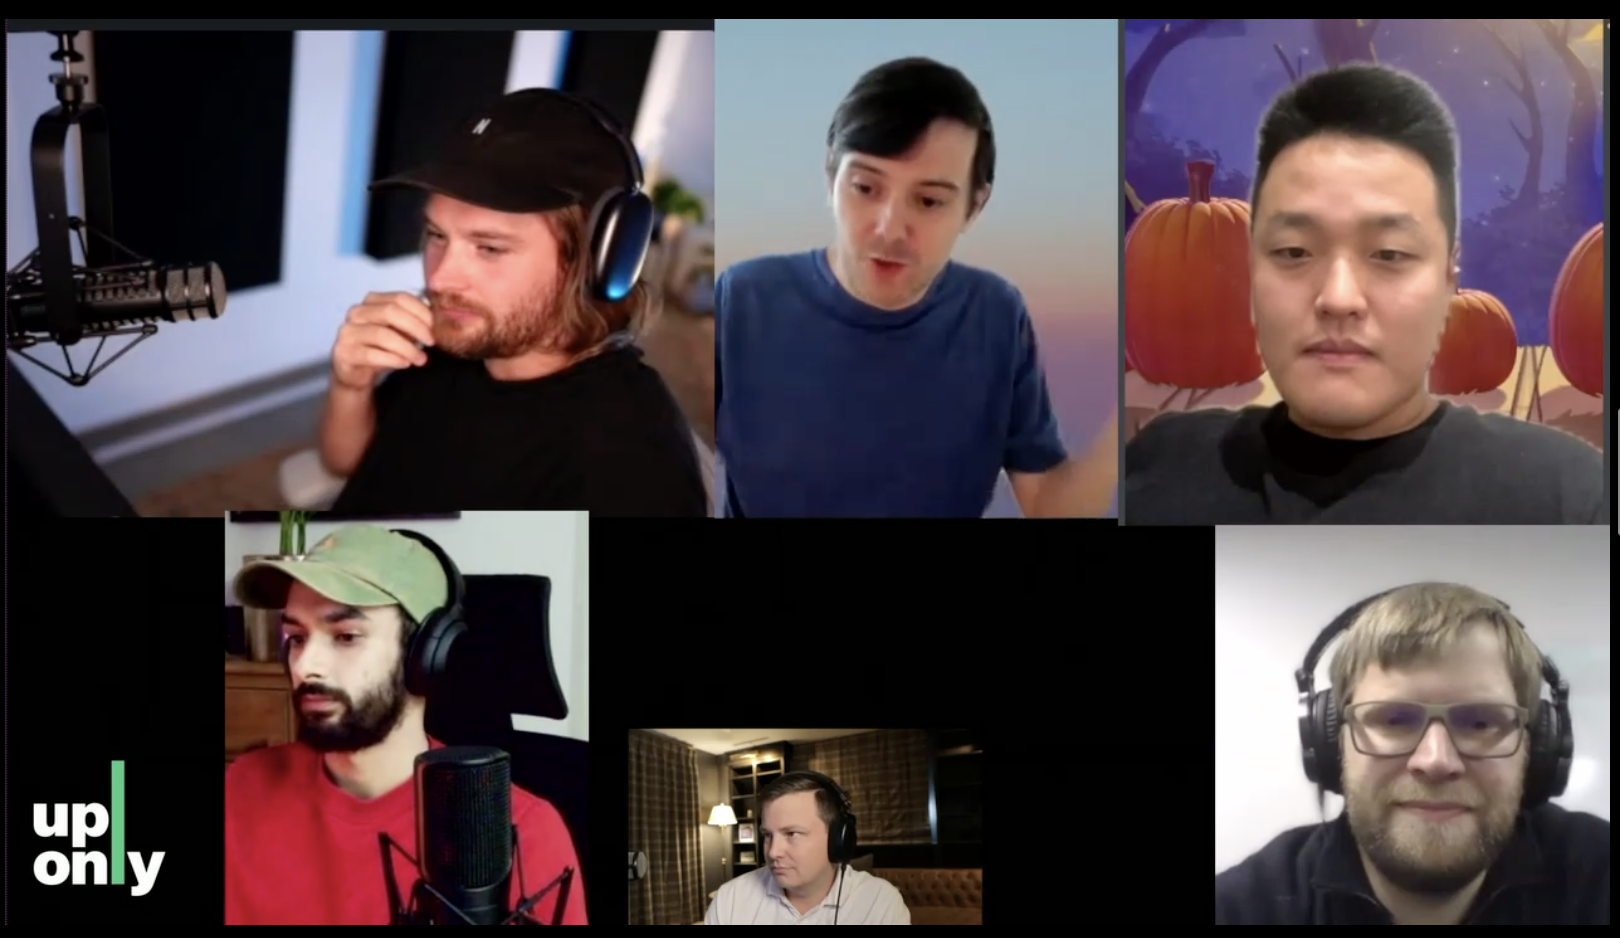 Martin Shkreli (top center) and Do Kwon (top right) on UpOnly podcast